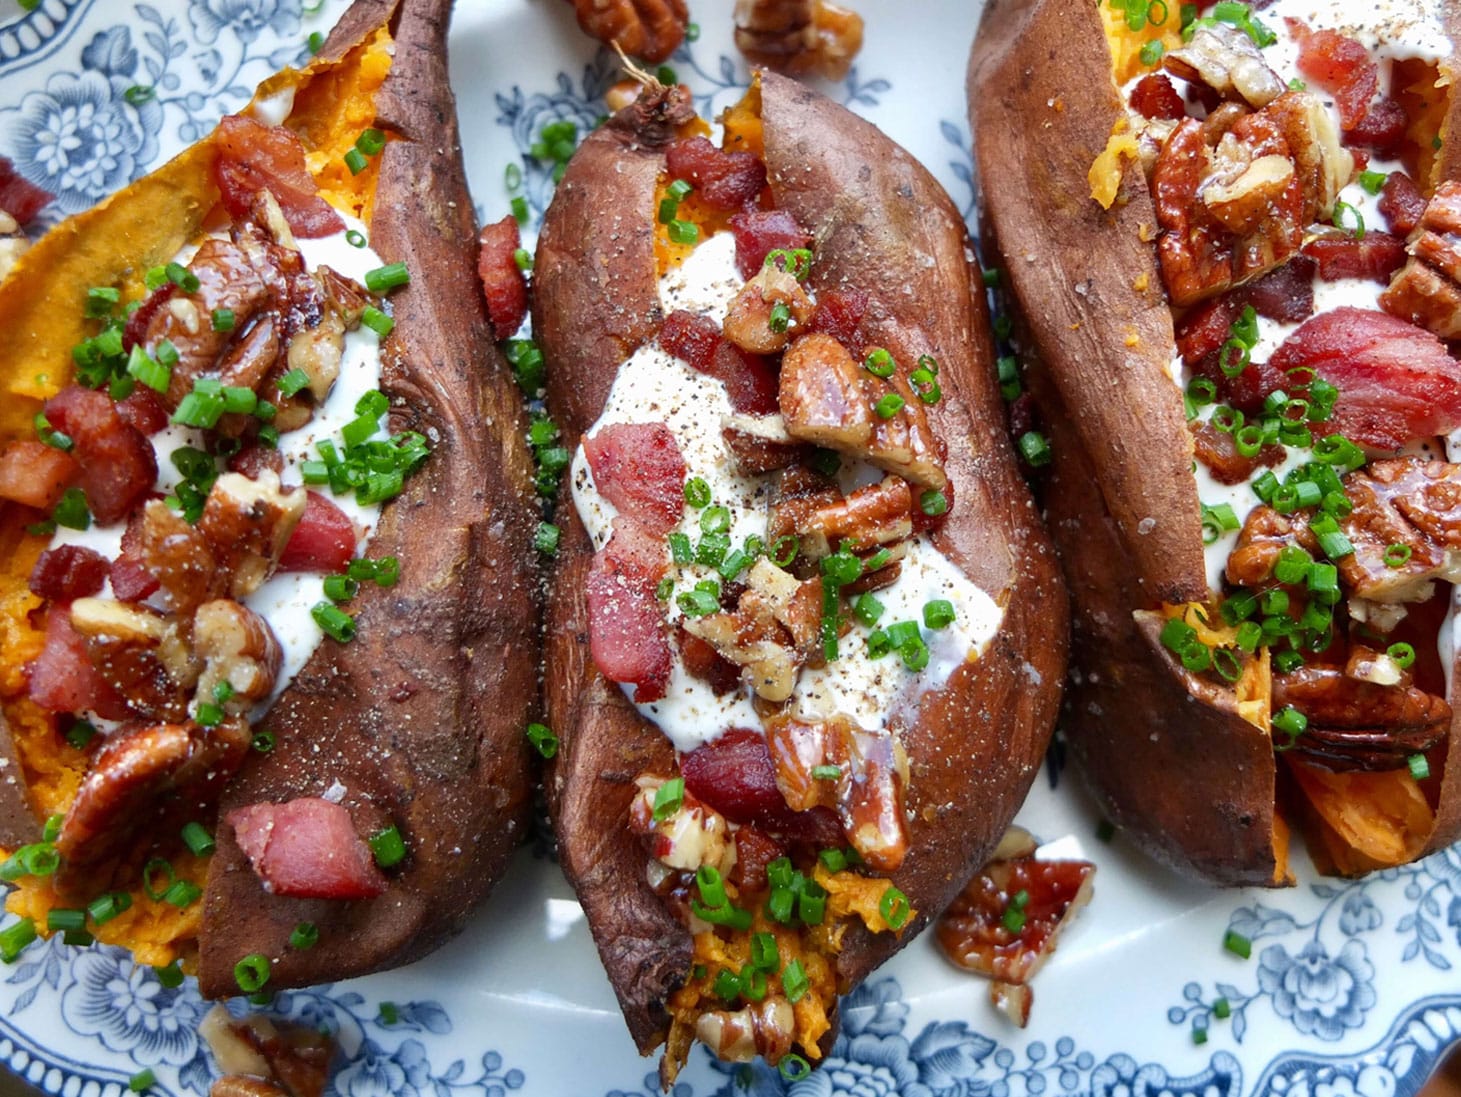 BBQ Sweet Potatoes with Sour Cream, Bacon and Caramelised Pecans